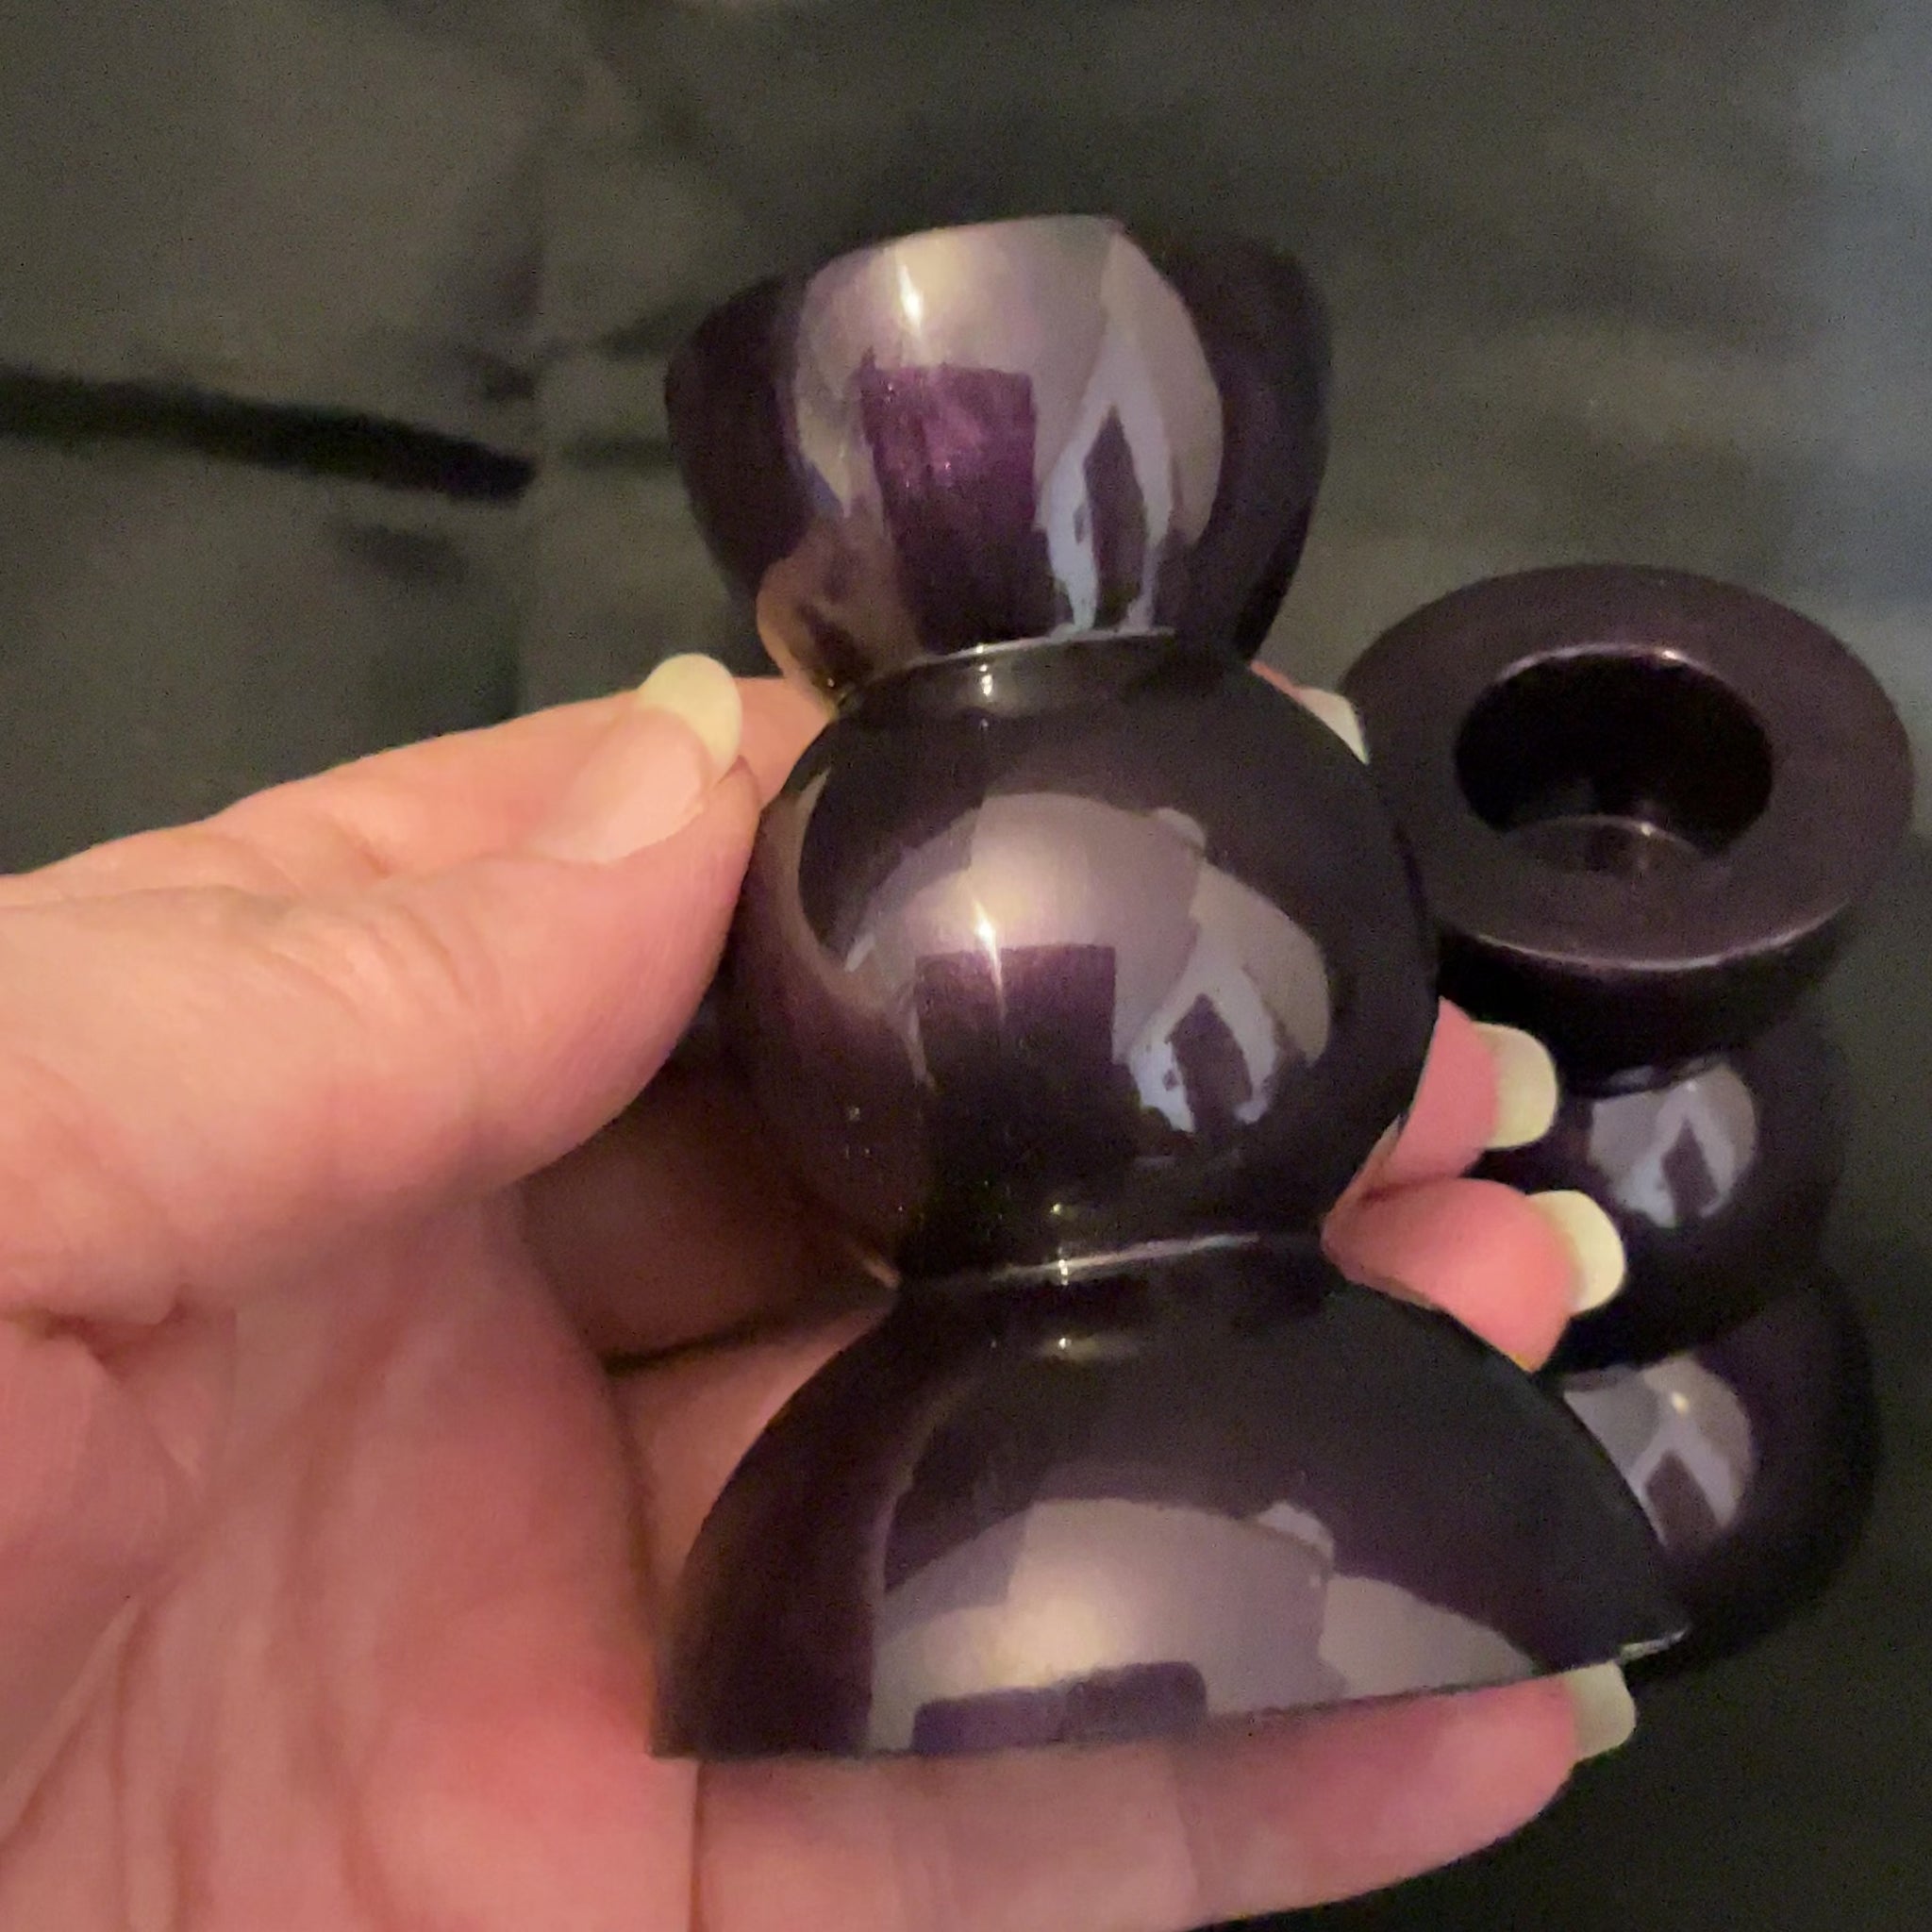 Handmade Pearly Deep Dark Purple Resin Rounded Geometric Goth Candlestick Holders video showing how there are flashes of dark purple as the light hits it.